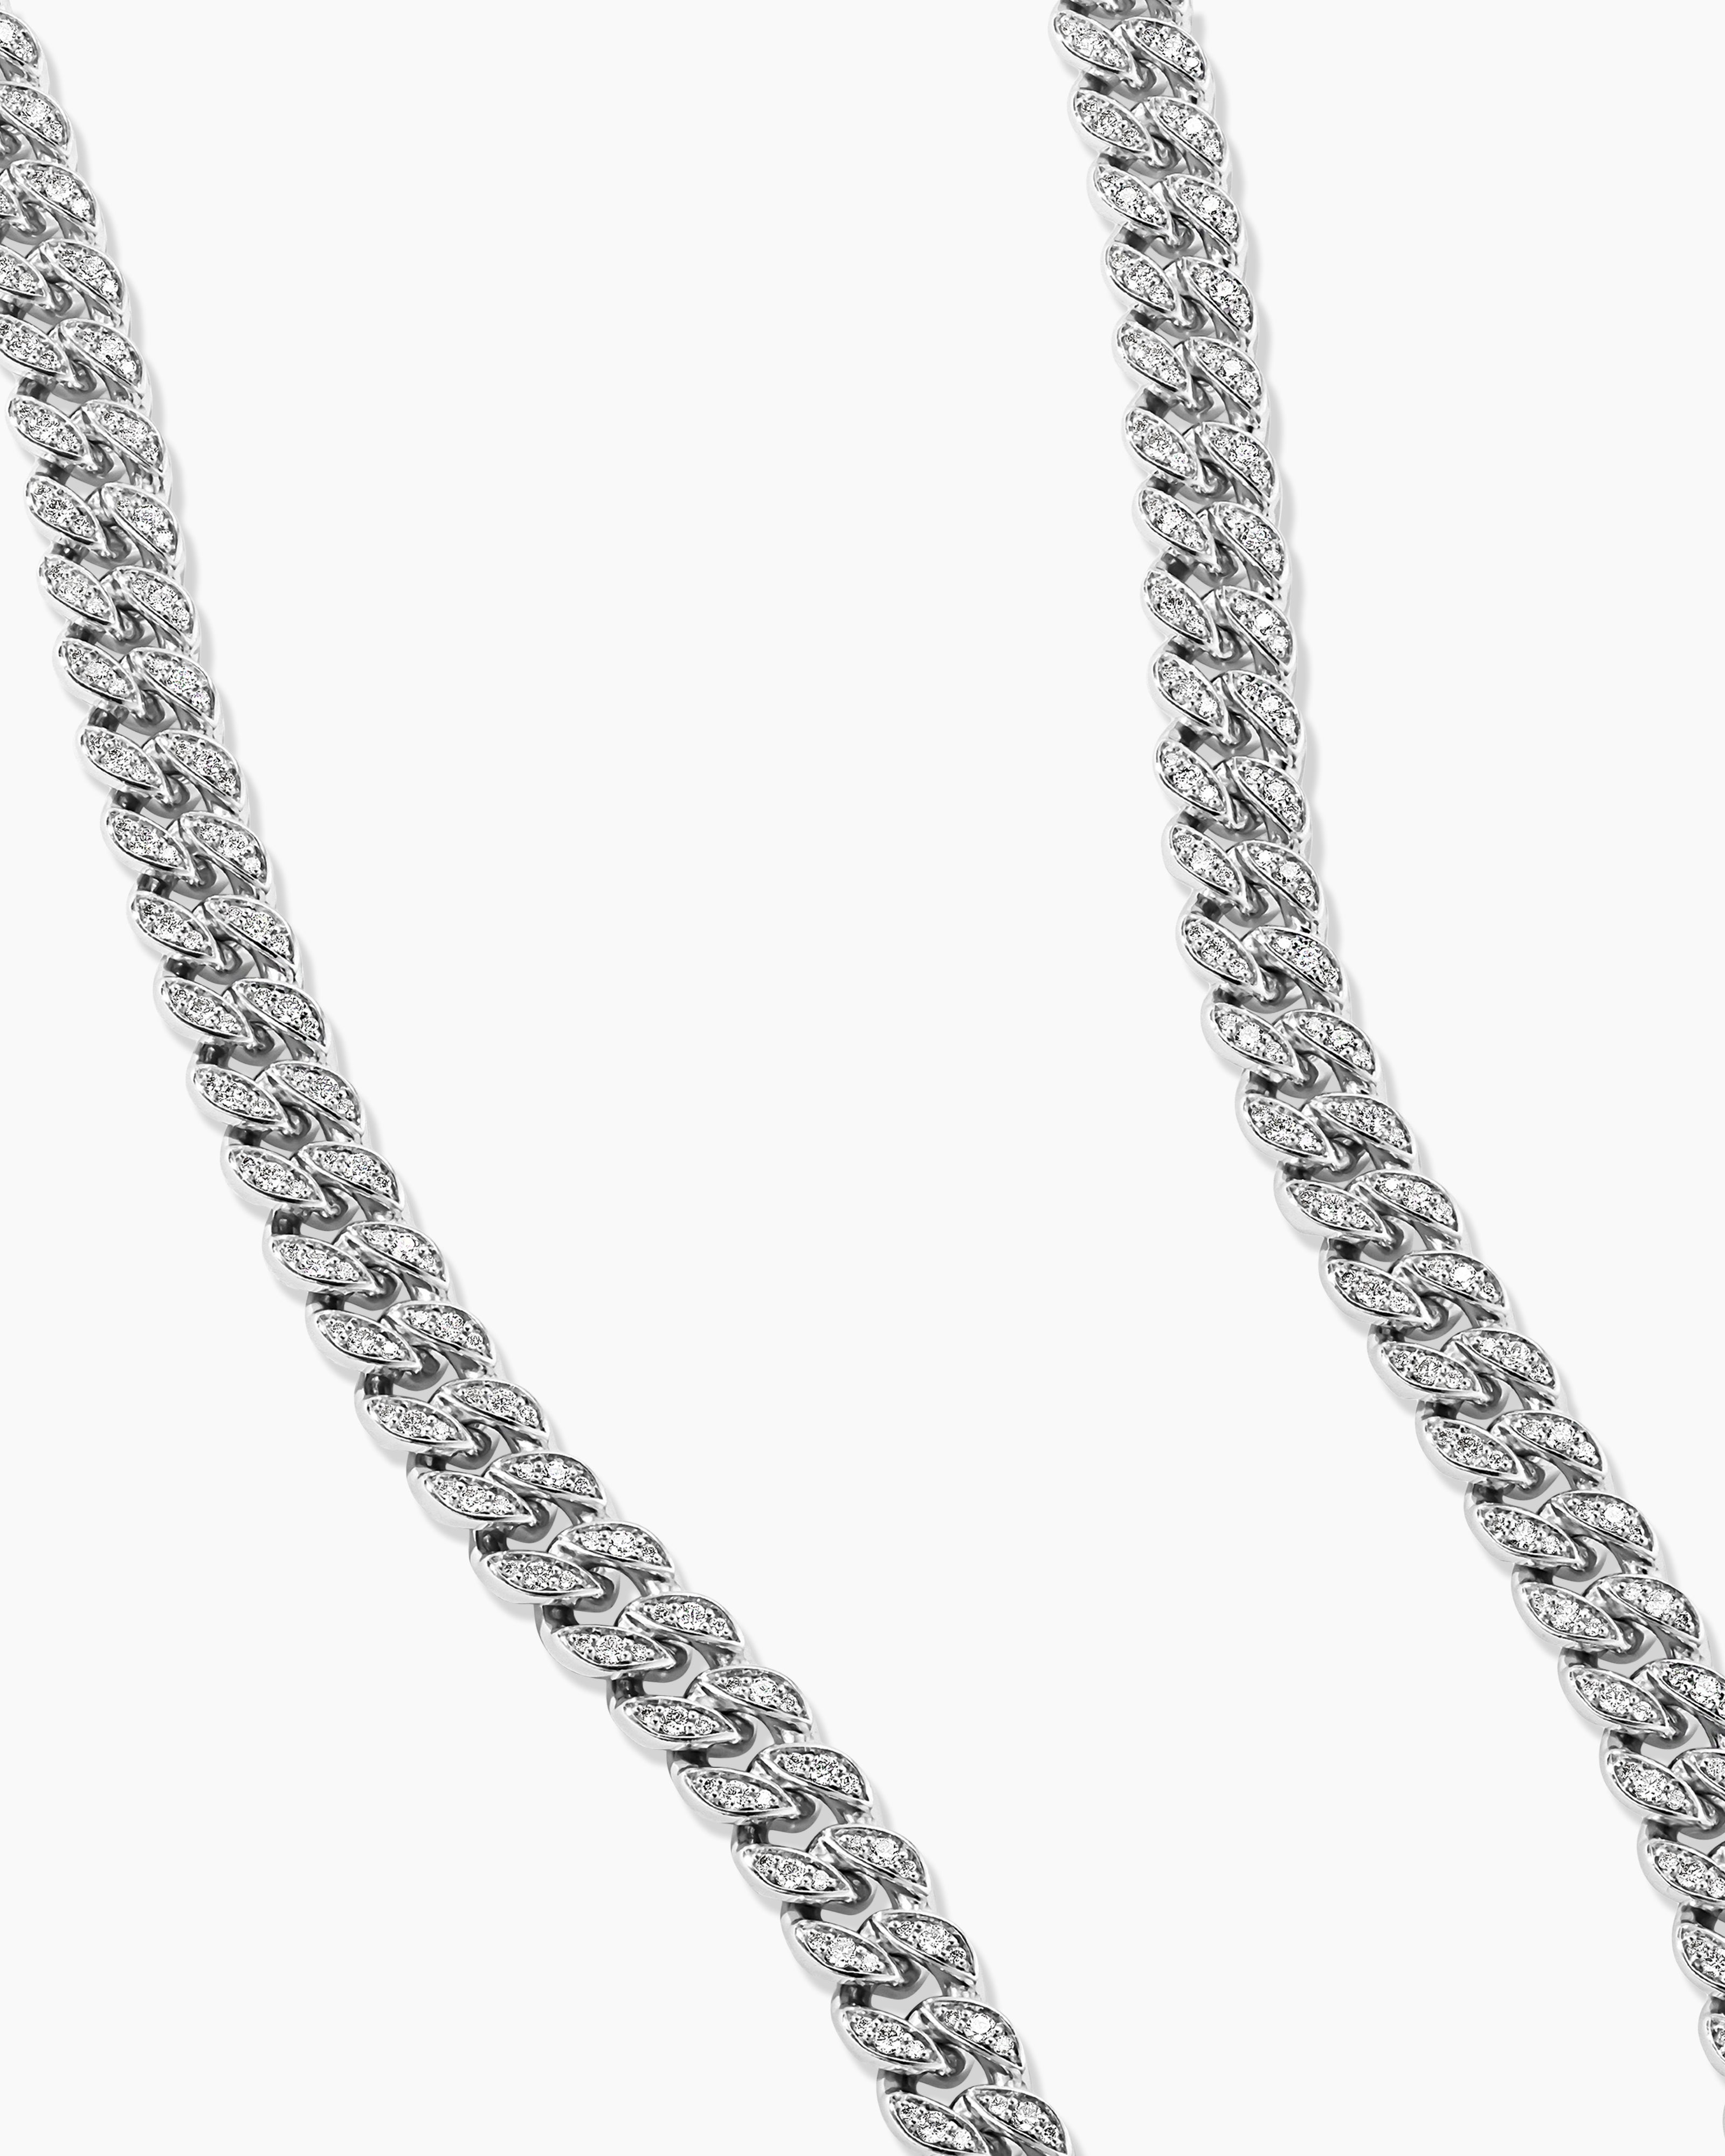 Curb Chain Necklace in Sterling Silver, 8mm | David Yurman